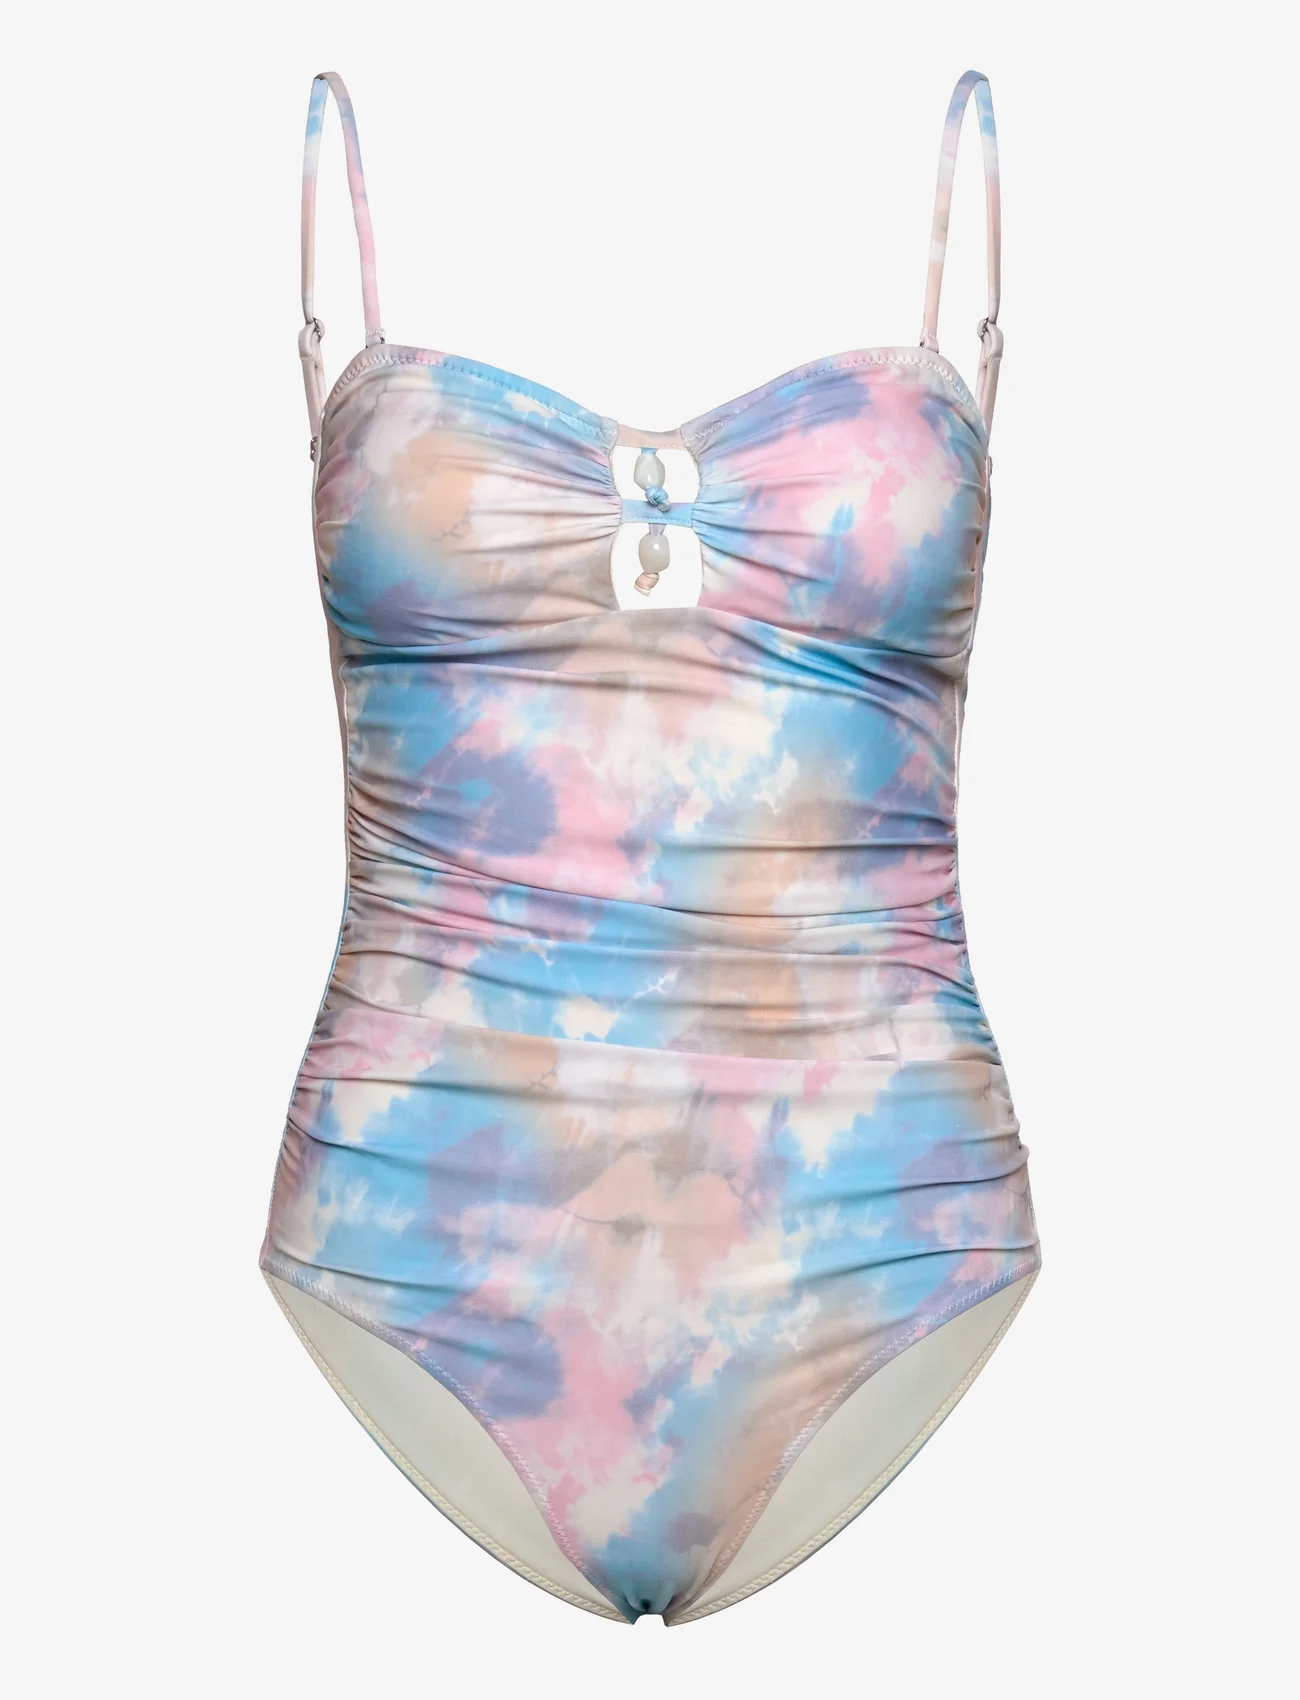 Ganni - Recycled Printed - swimsuits - bleached mauve - 0